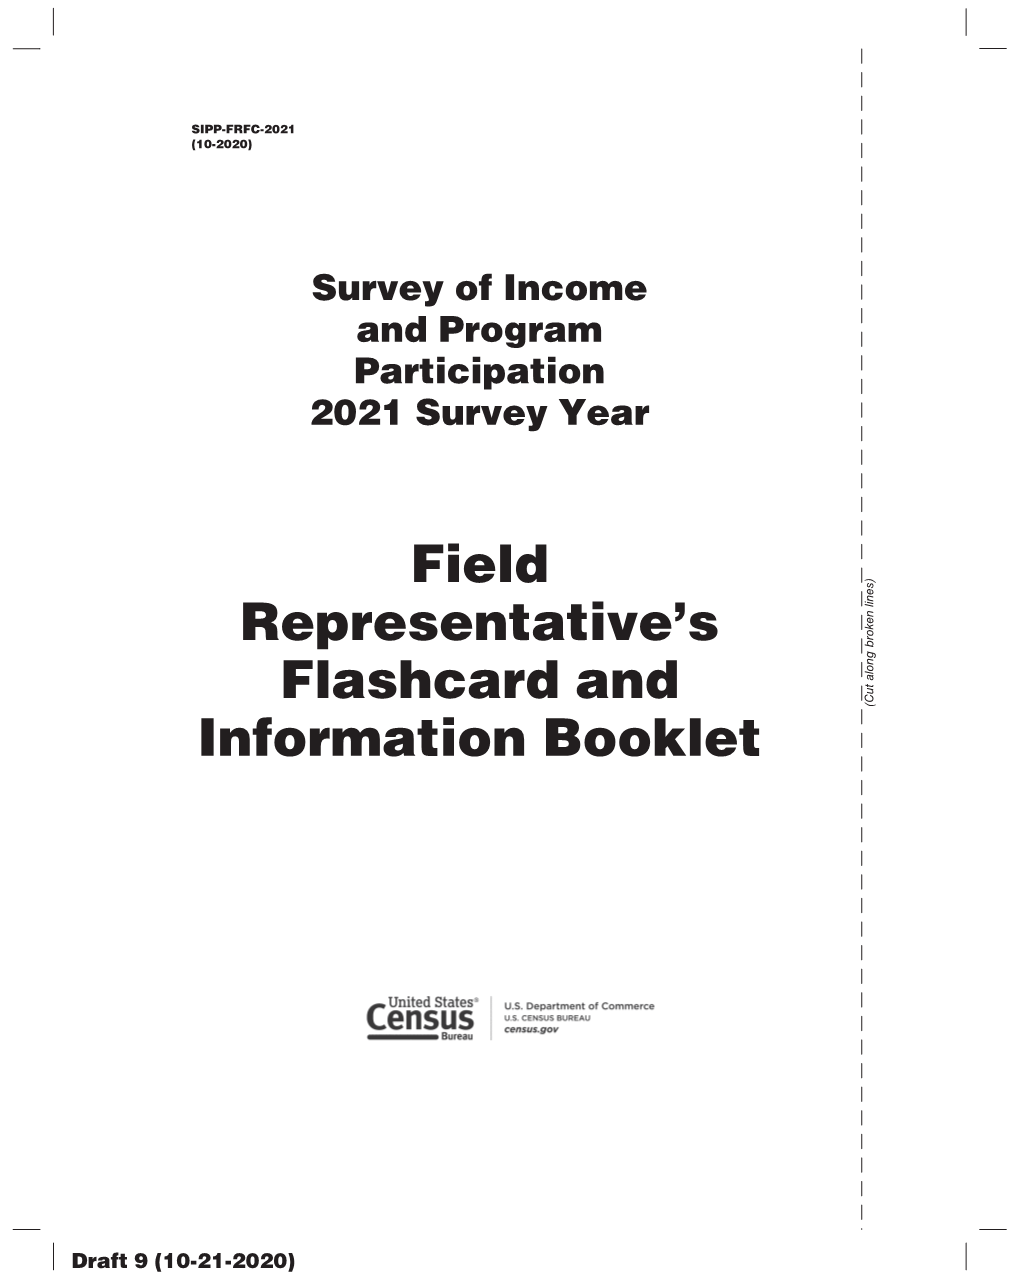 Field Representative's Flashcard and Information Booklet